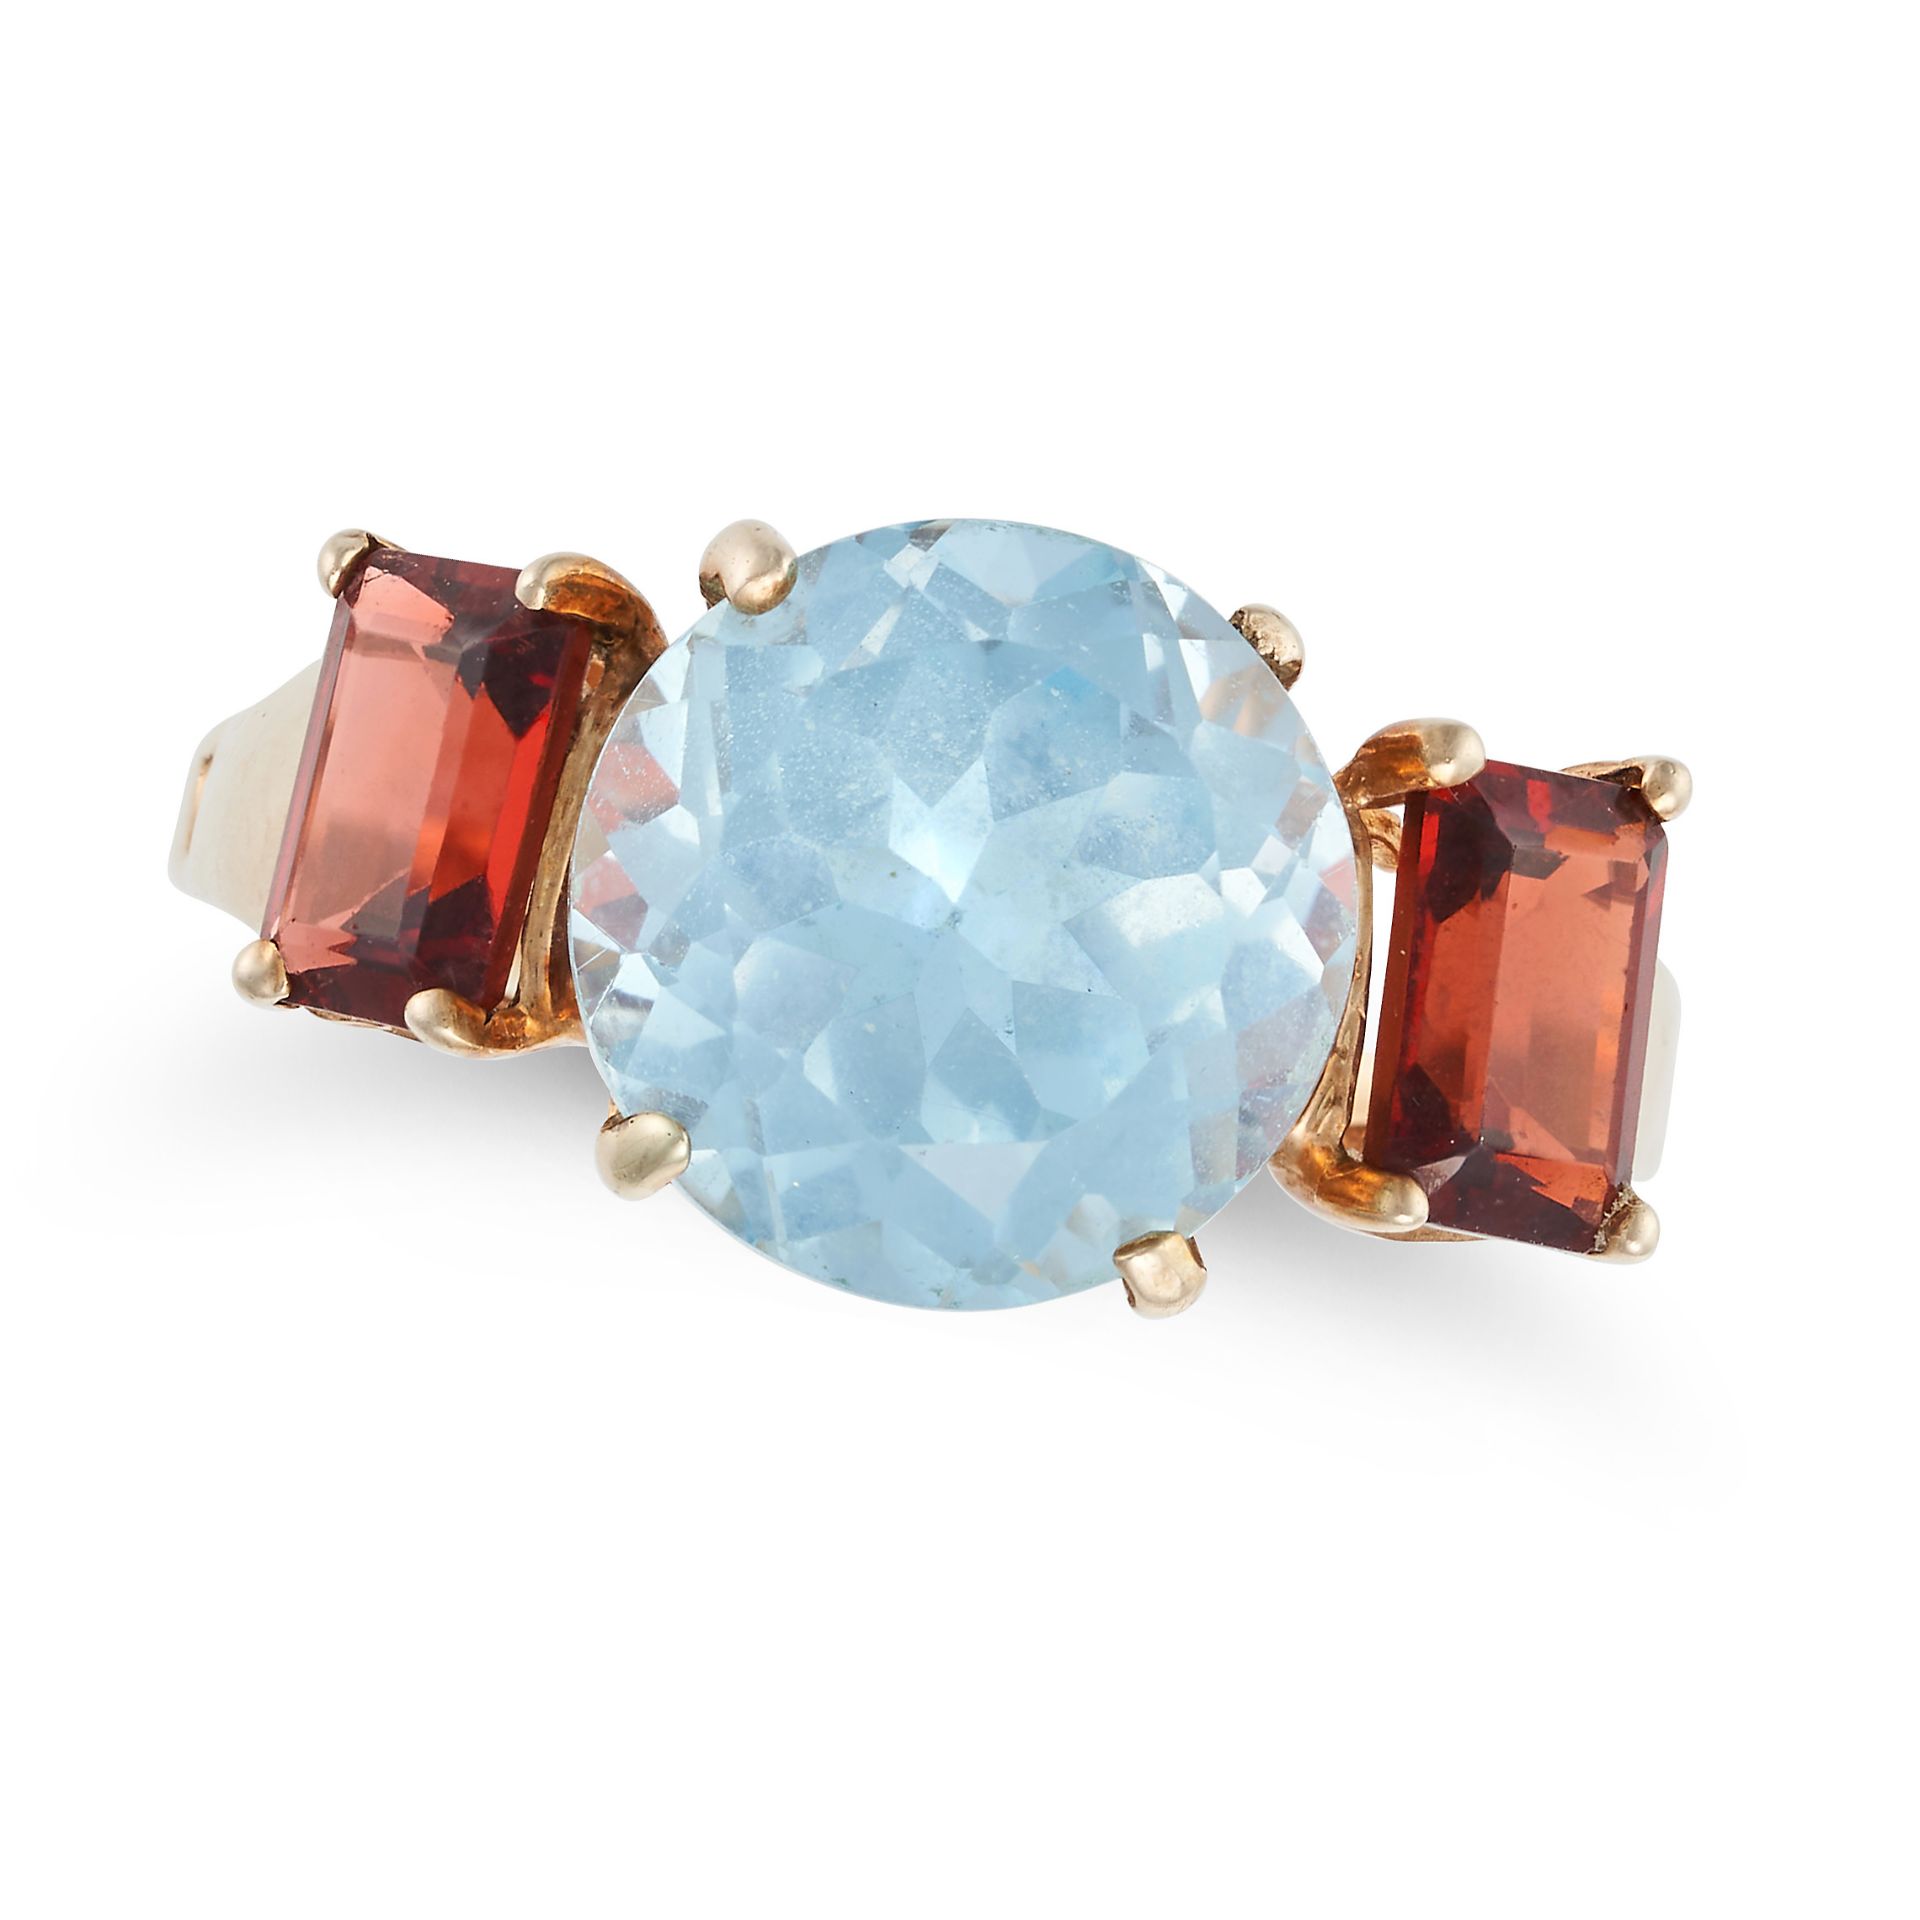 A BLUE TOPAZ AND GARNET RING set with a round cut blue topaz, accented on each side by a rectangu...